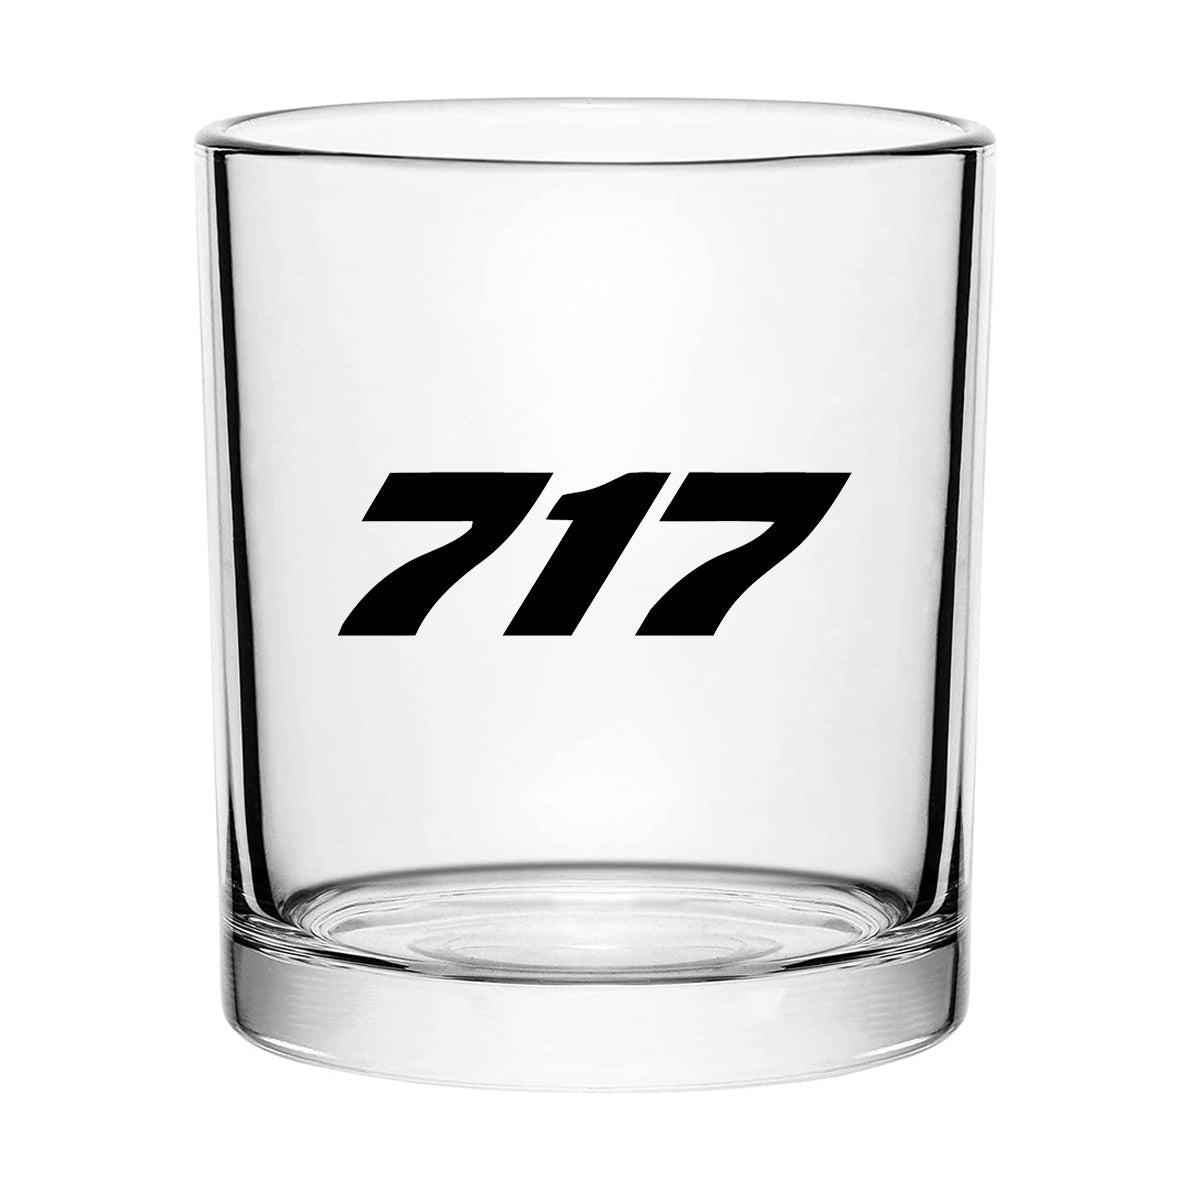 717 Flat Text Designed Special Whiskey Glasses